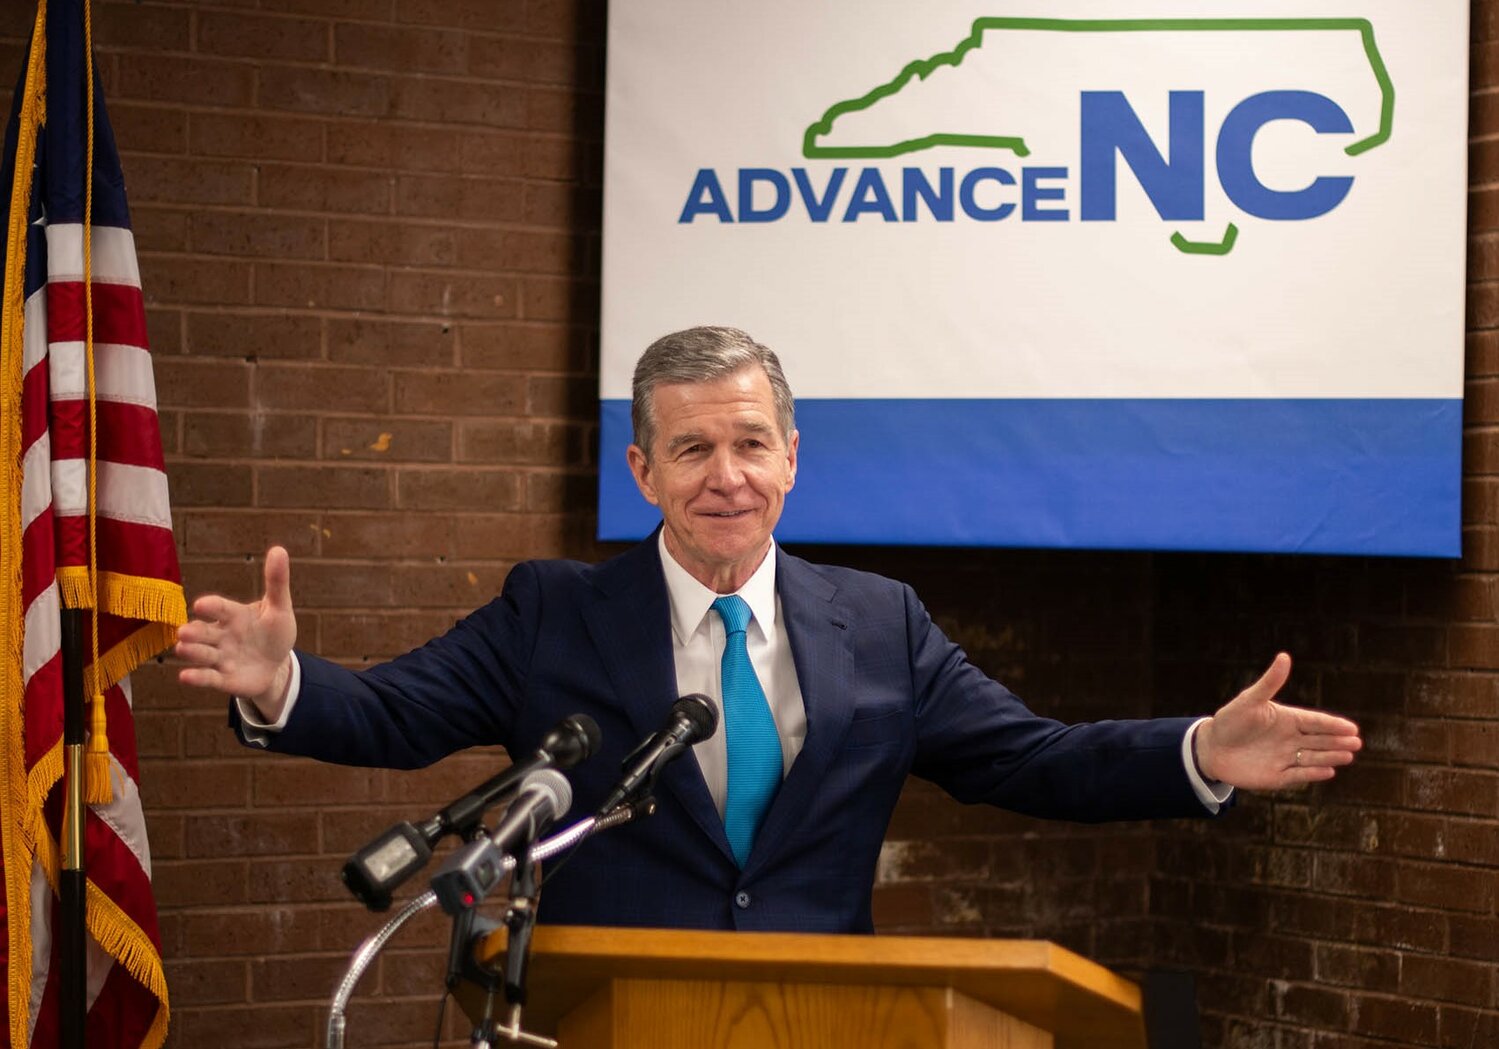 N.C. Gov. Roy Cooper speaks at a meeting of representatives of community colleges, universities and workforce development boards about the AdvanceNC regional workforce development partnership.